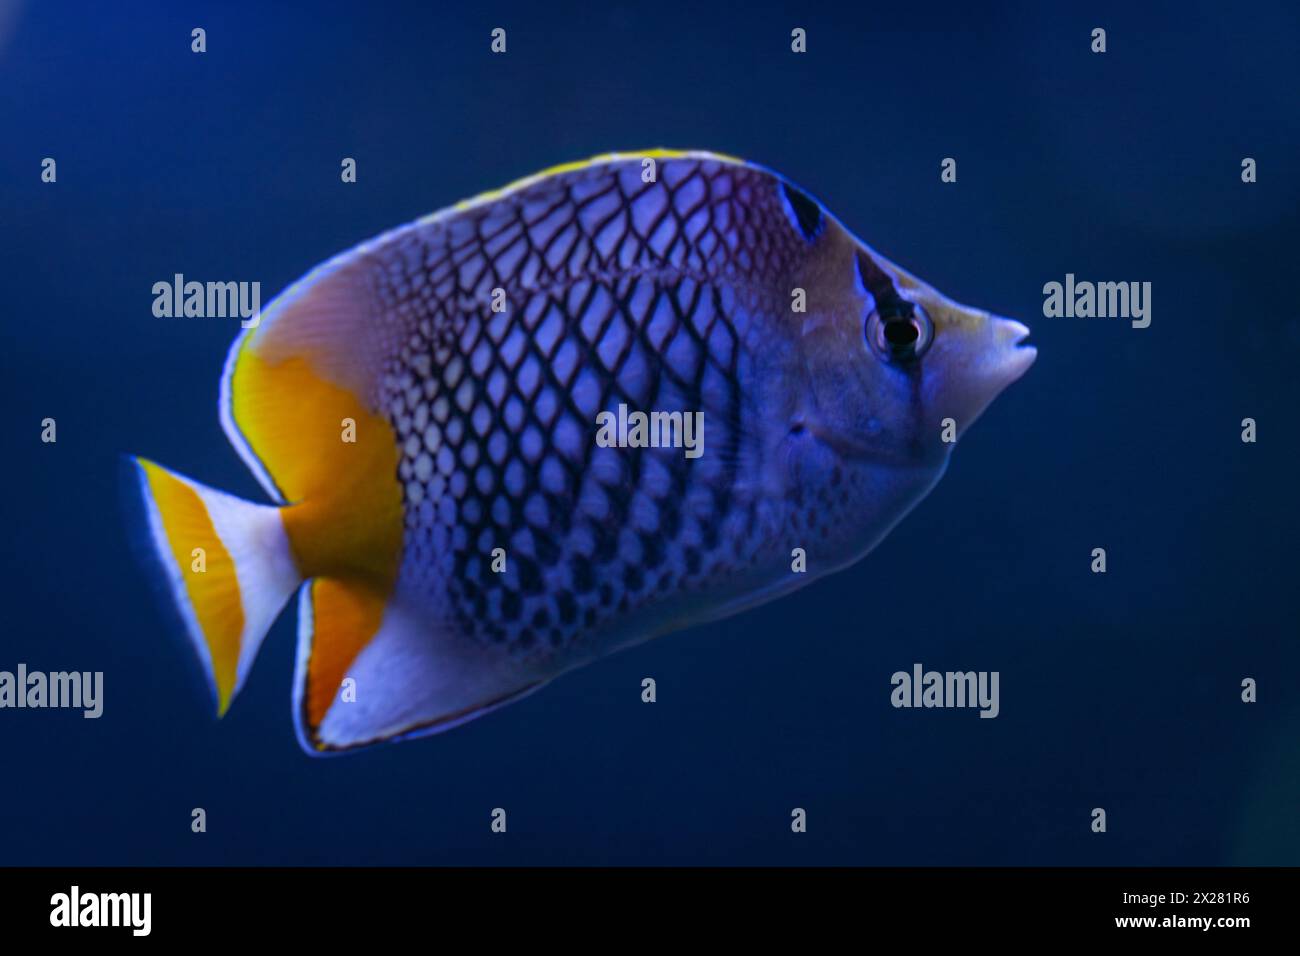 Pearlscale butterflyfish (Chaetodon xanthurus), also known as yellow-tailed butterflyfish, crosshatch butterflyfish or Philippines chevron butterflyfi Stock Photo